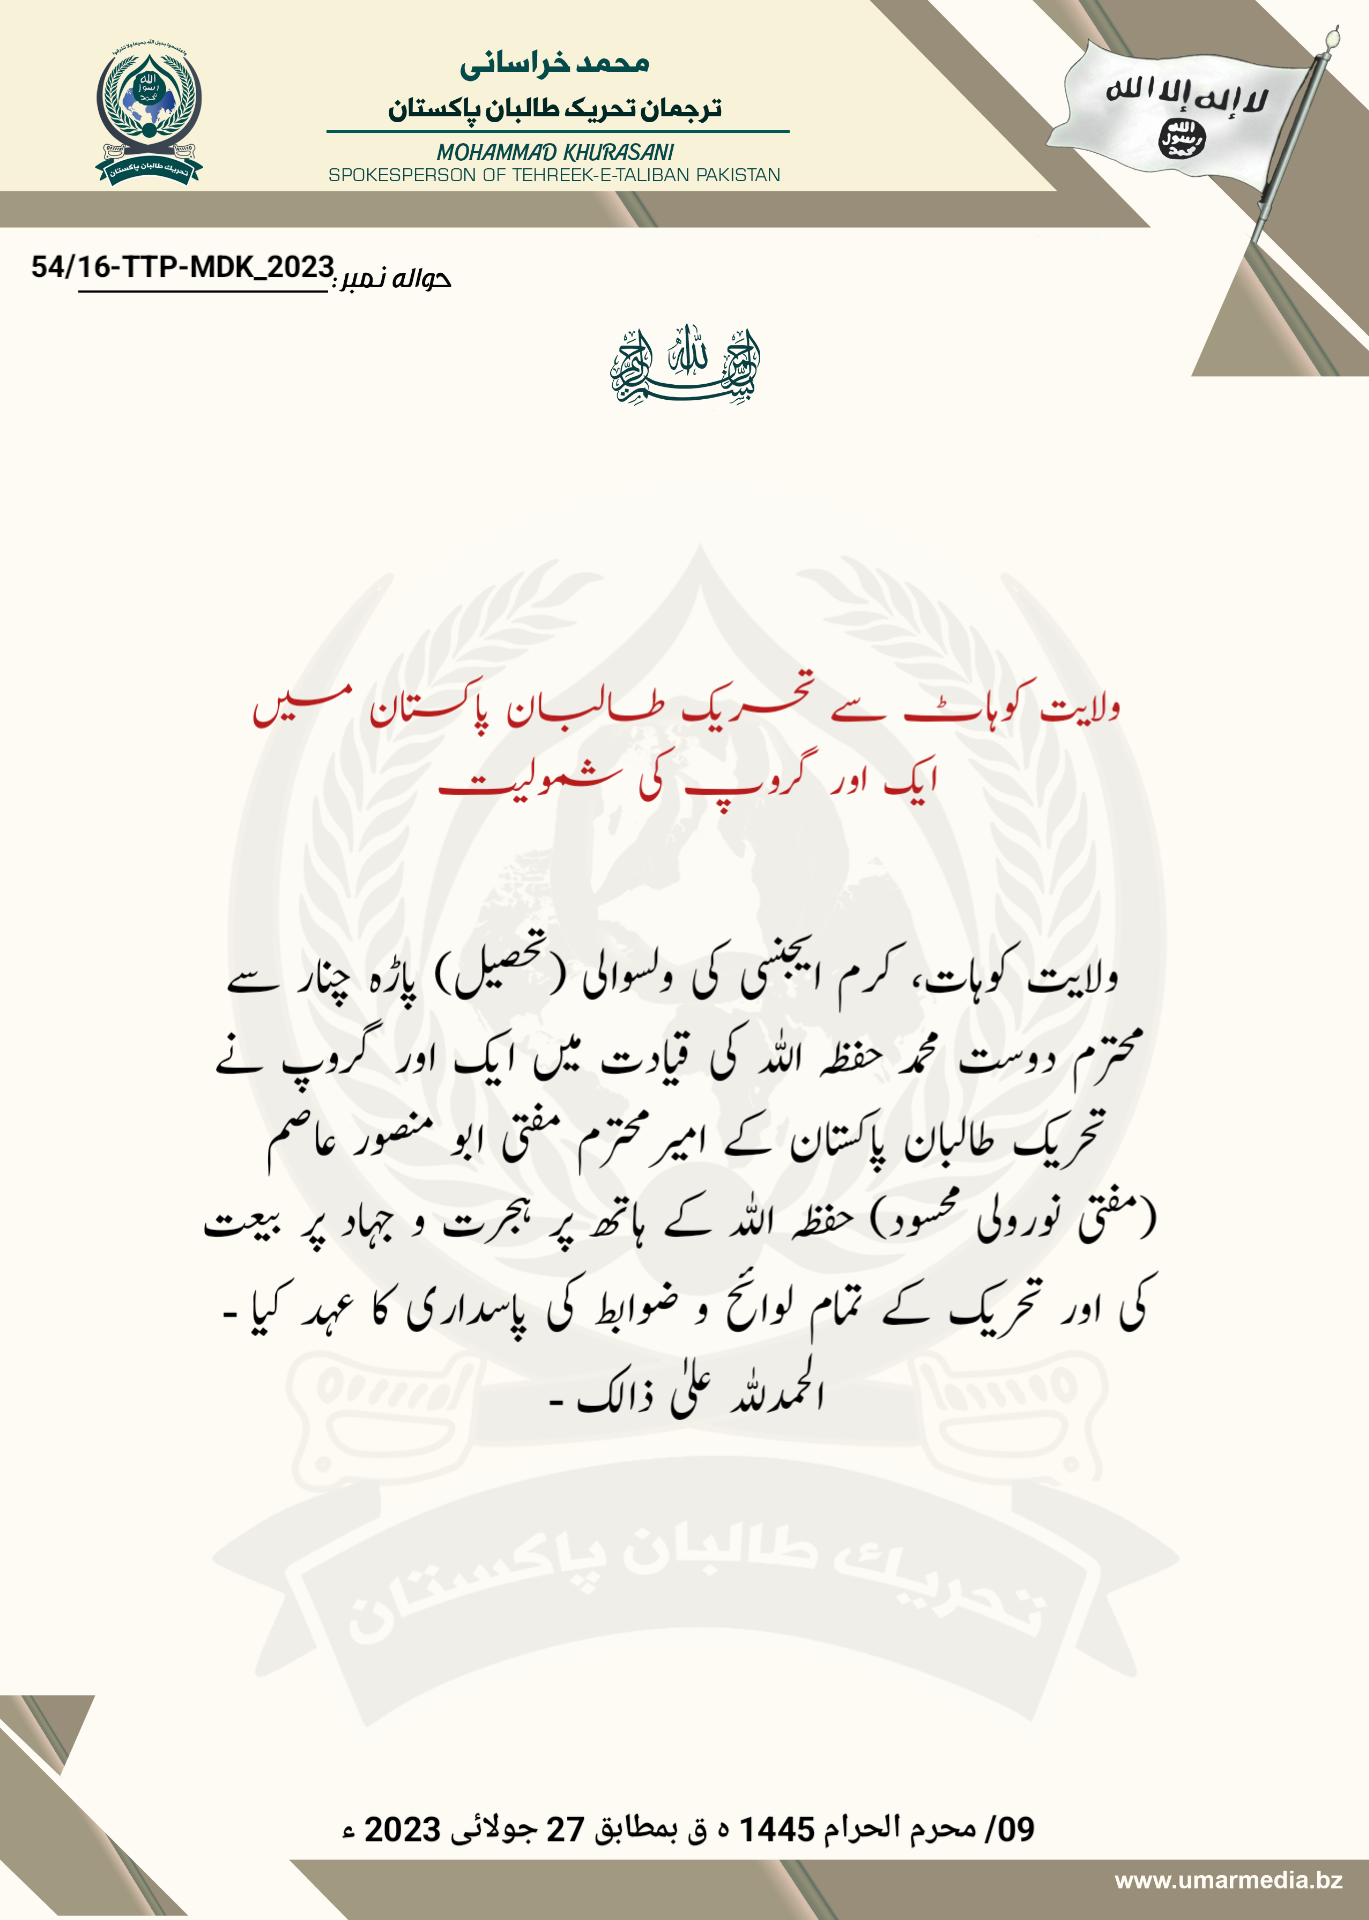 (Statement) Tehreek-e-Taliban Pakistan (TTP) Are Joined by a Group from Kohat, Para Chinar of Kurram Agency, Khyber Pakhtunkhwa, Pakistan – 27 July 2023